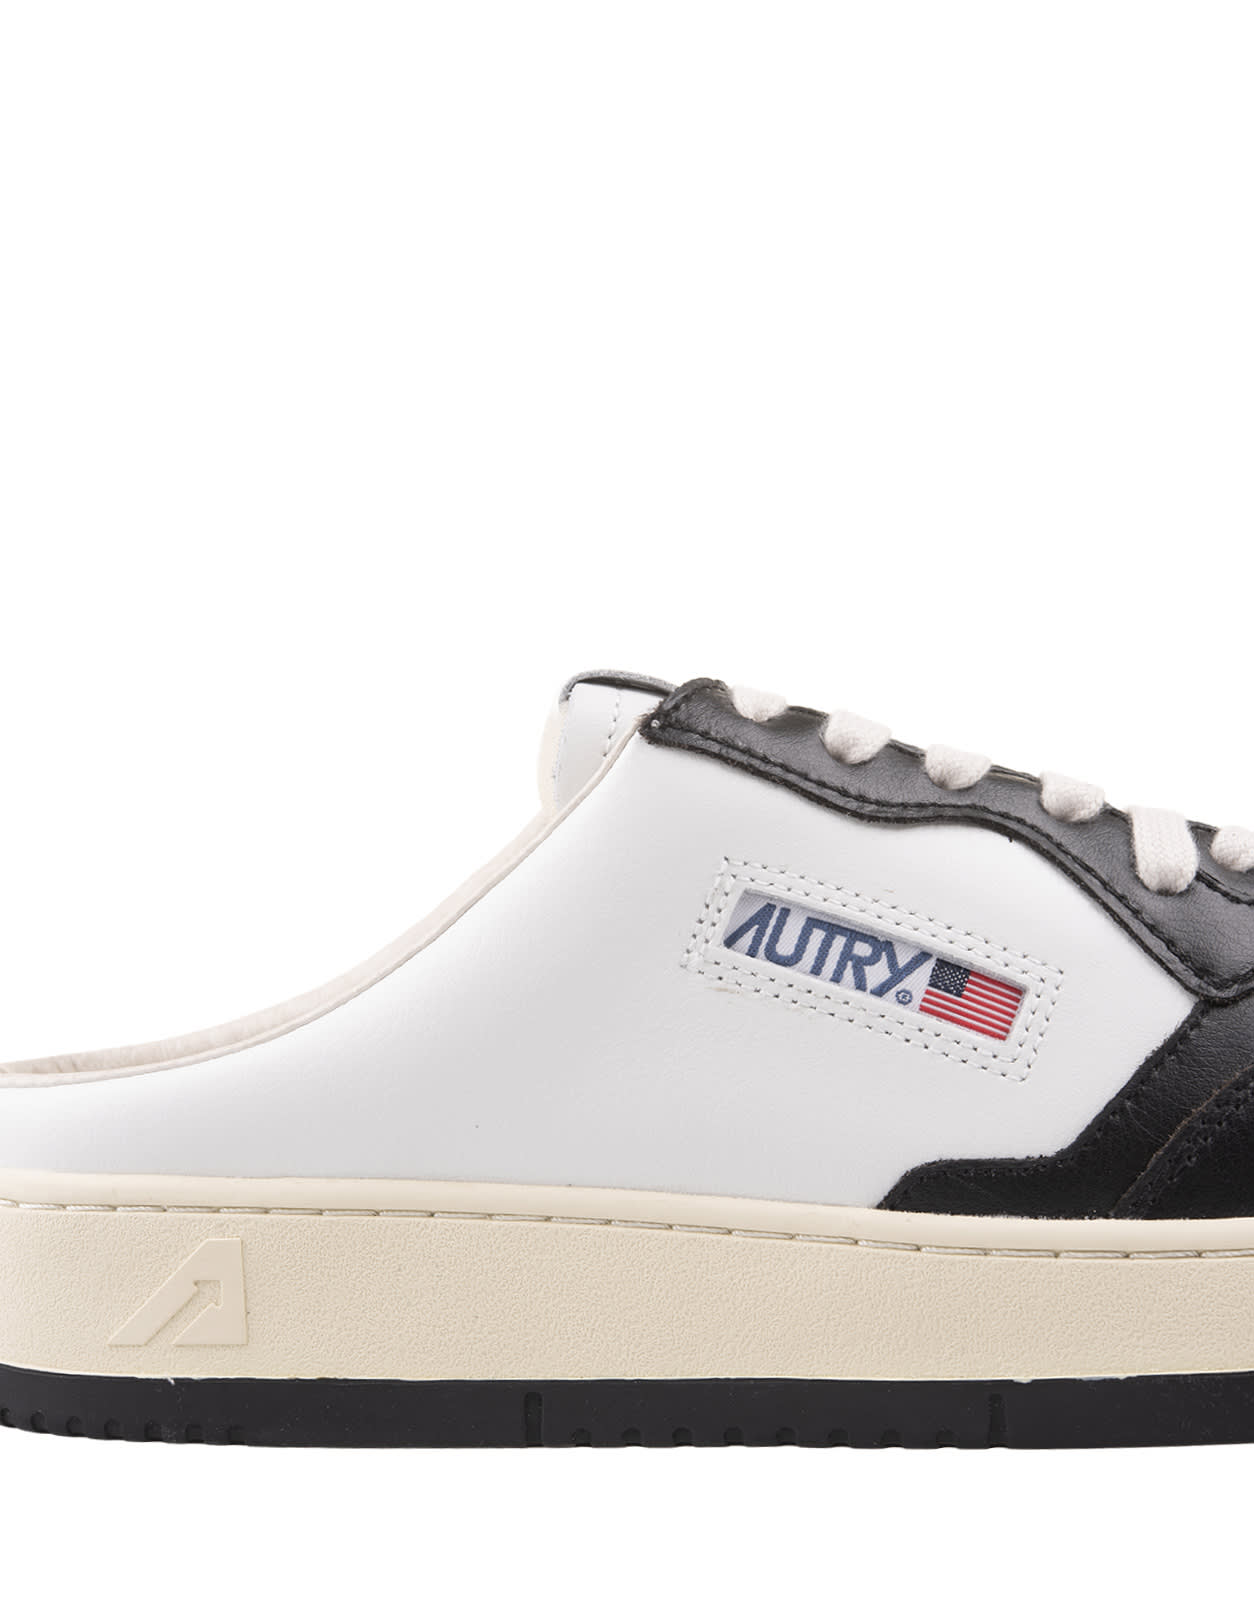 Shop Autry White And Black Medalist Mule Sneakers